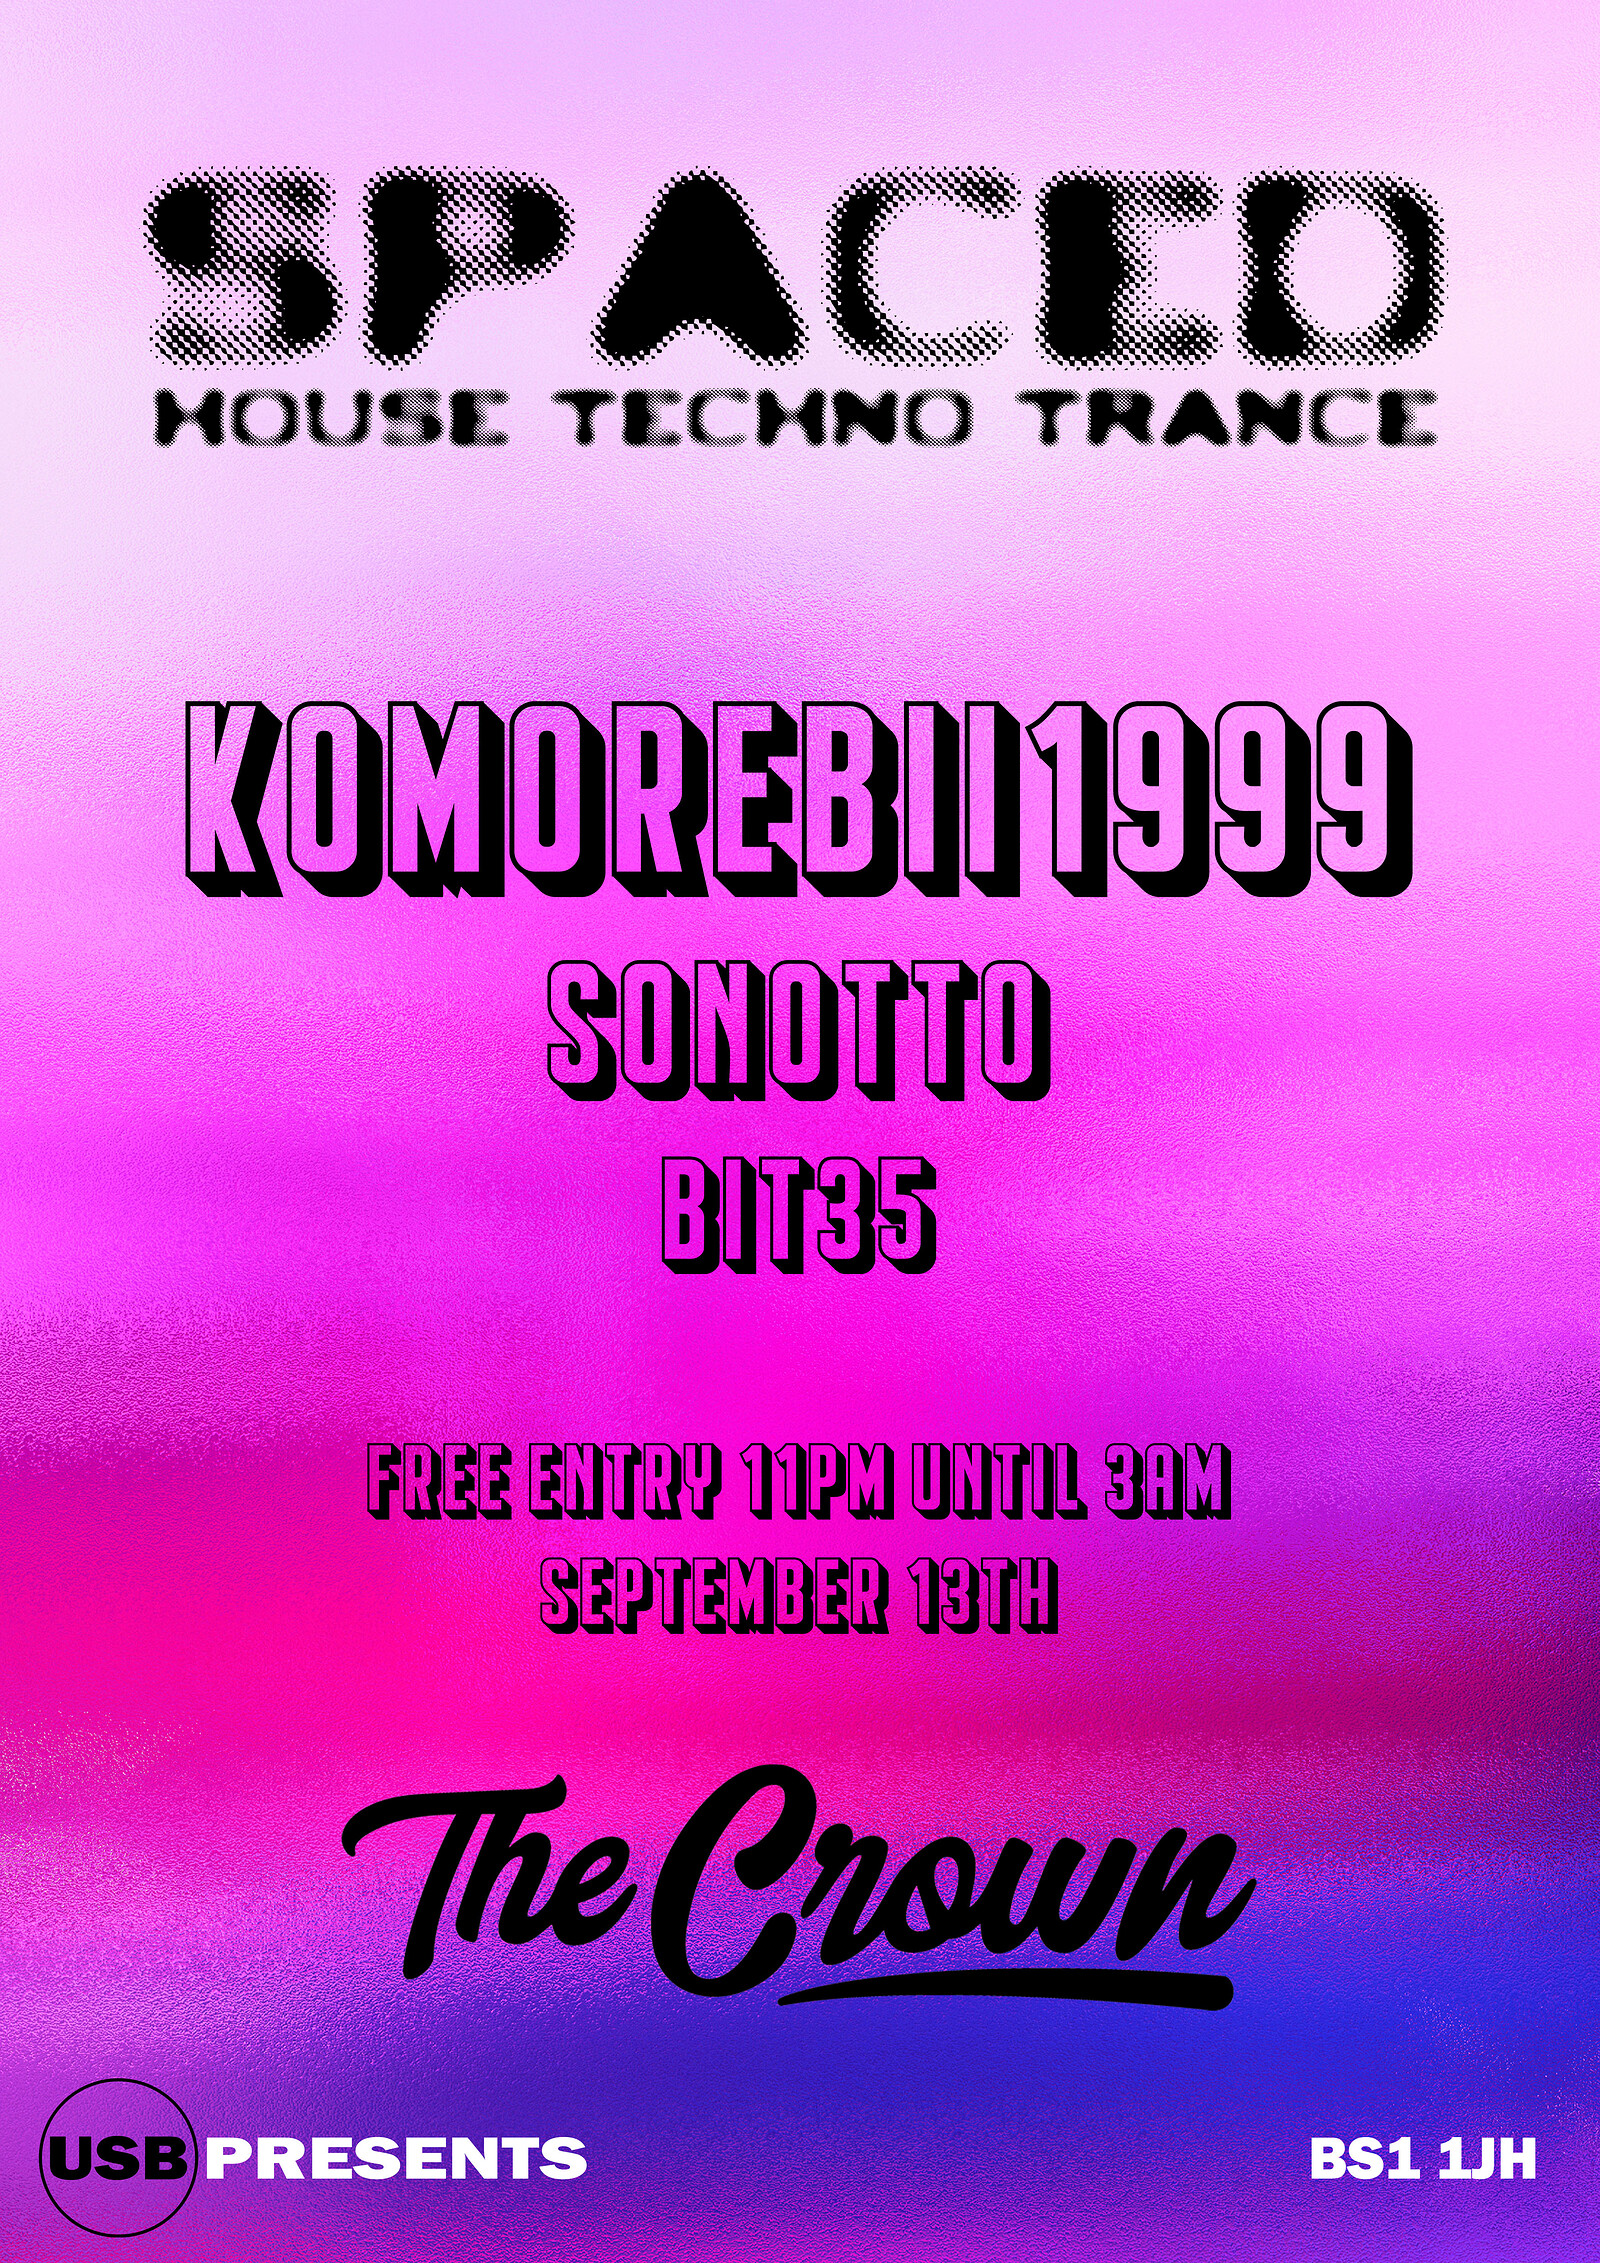 SPACED 2 - House/Techno/Trance at The Crown